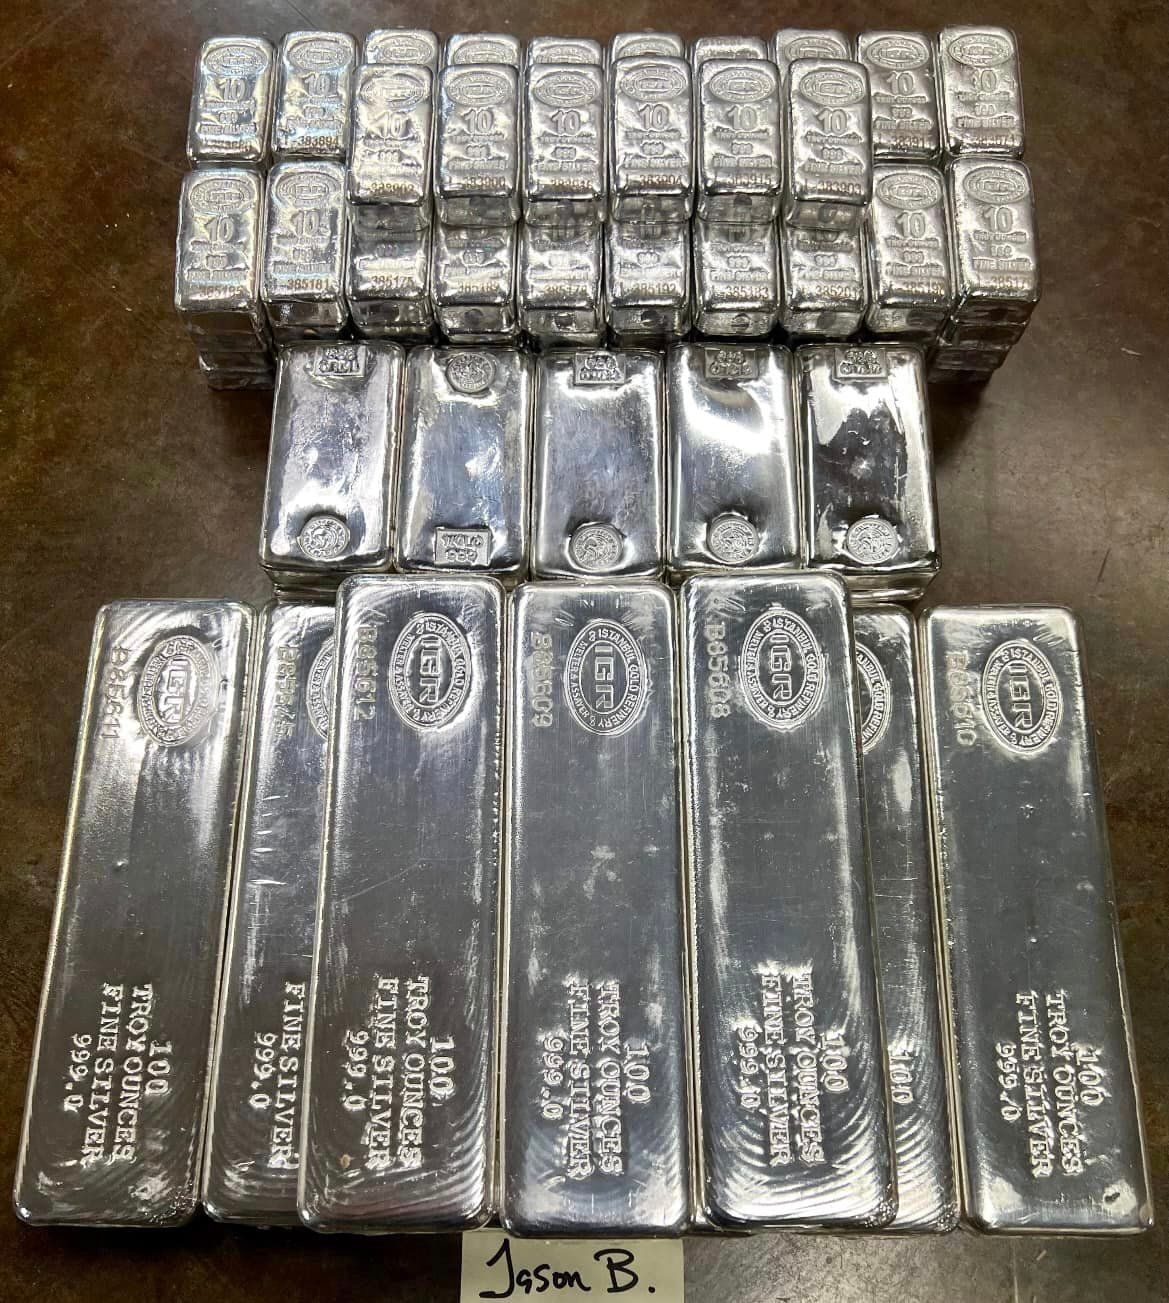 A bunch of silver bars are stacked on top of each other